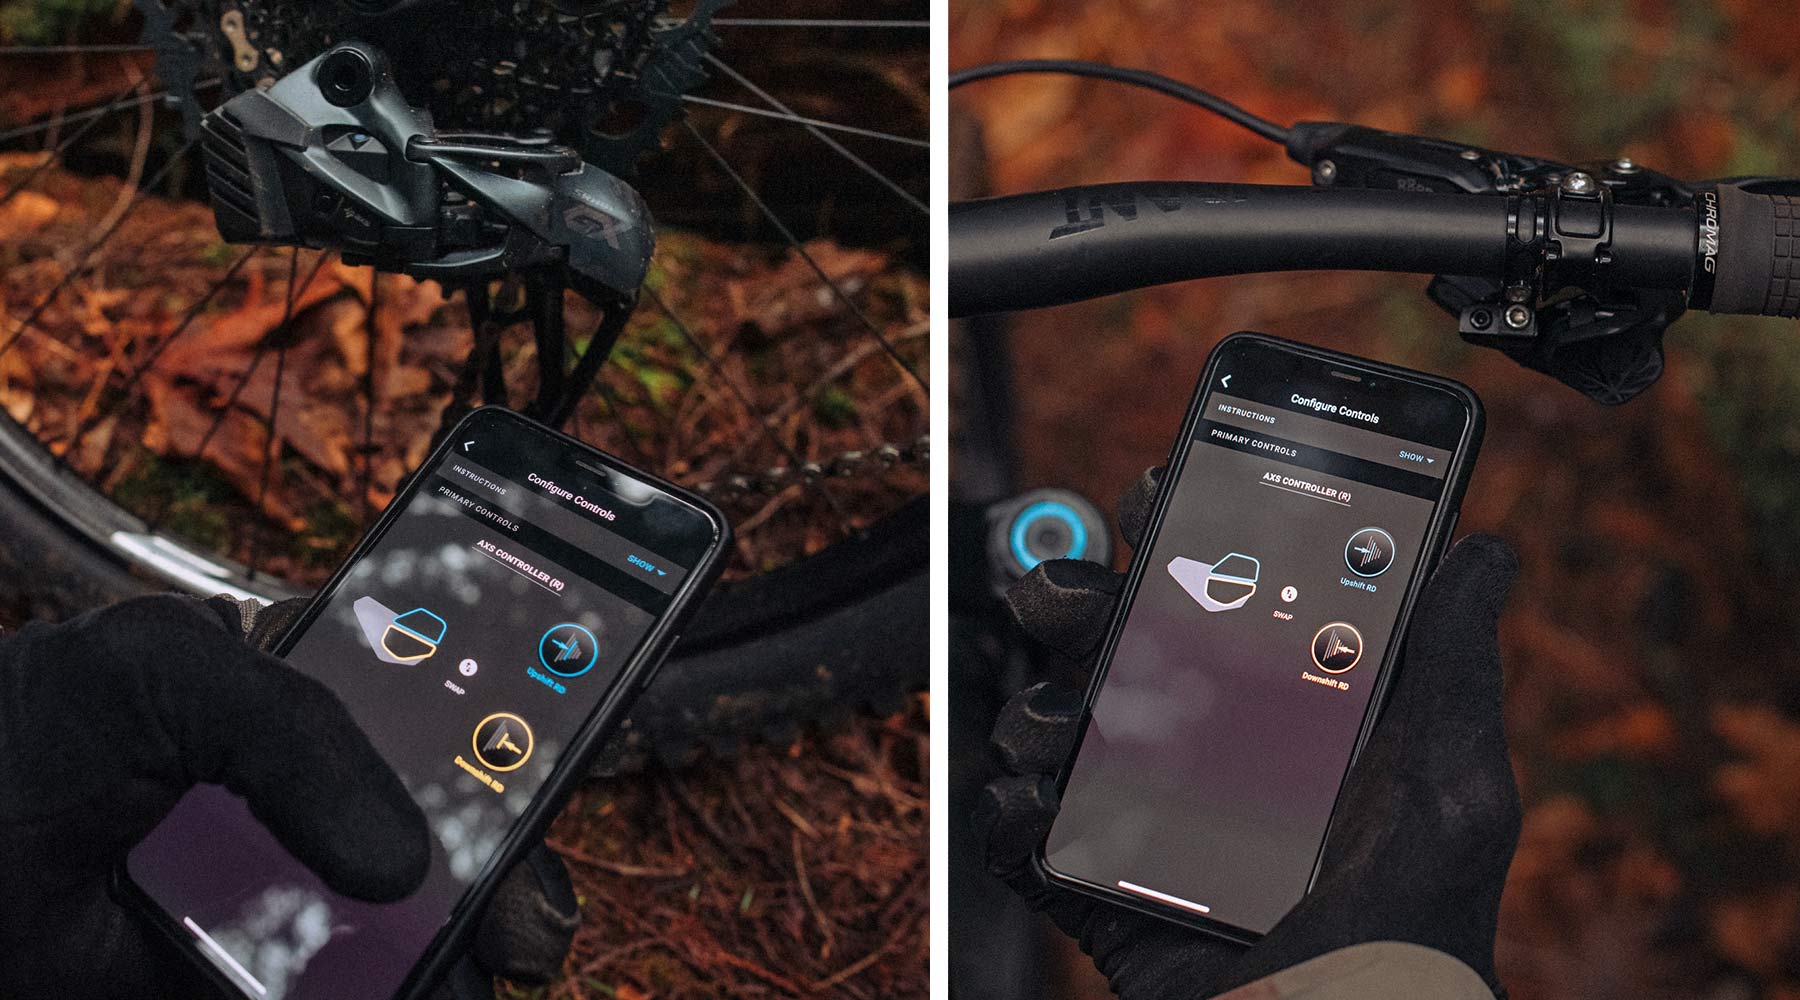 SRAM GX Eagle AXS group, low-cost 1x12-speed wireless electronic app setup & control